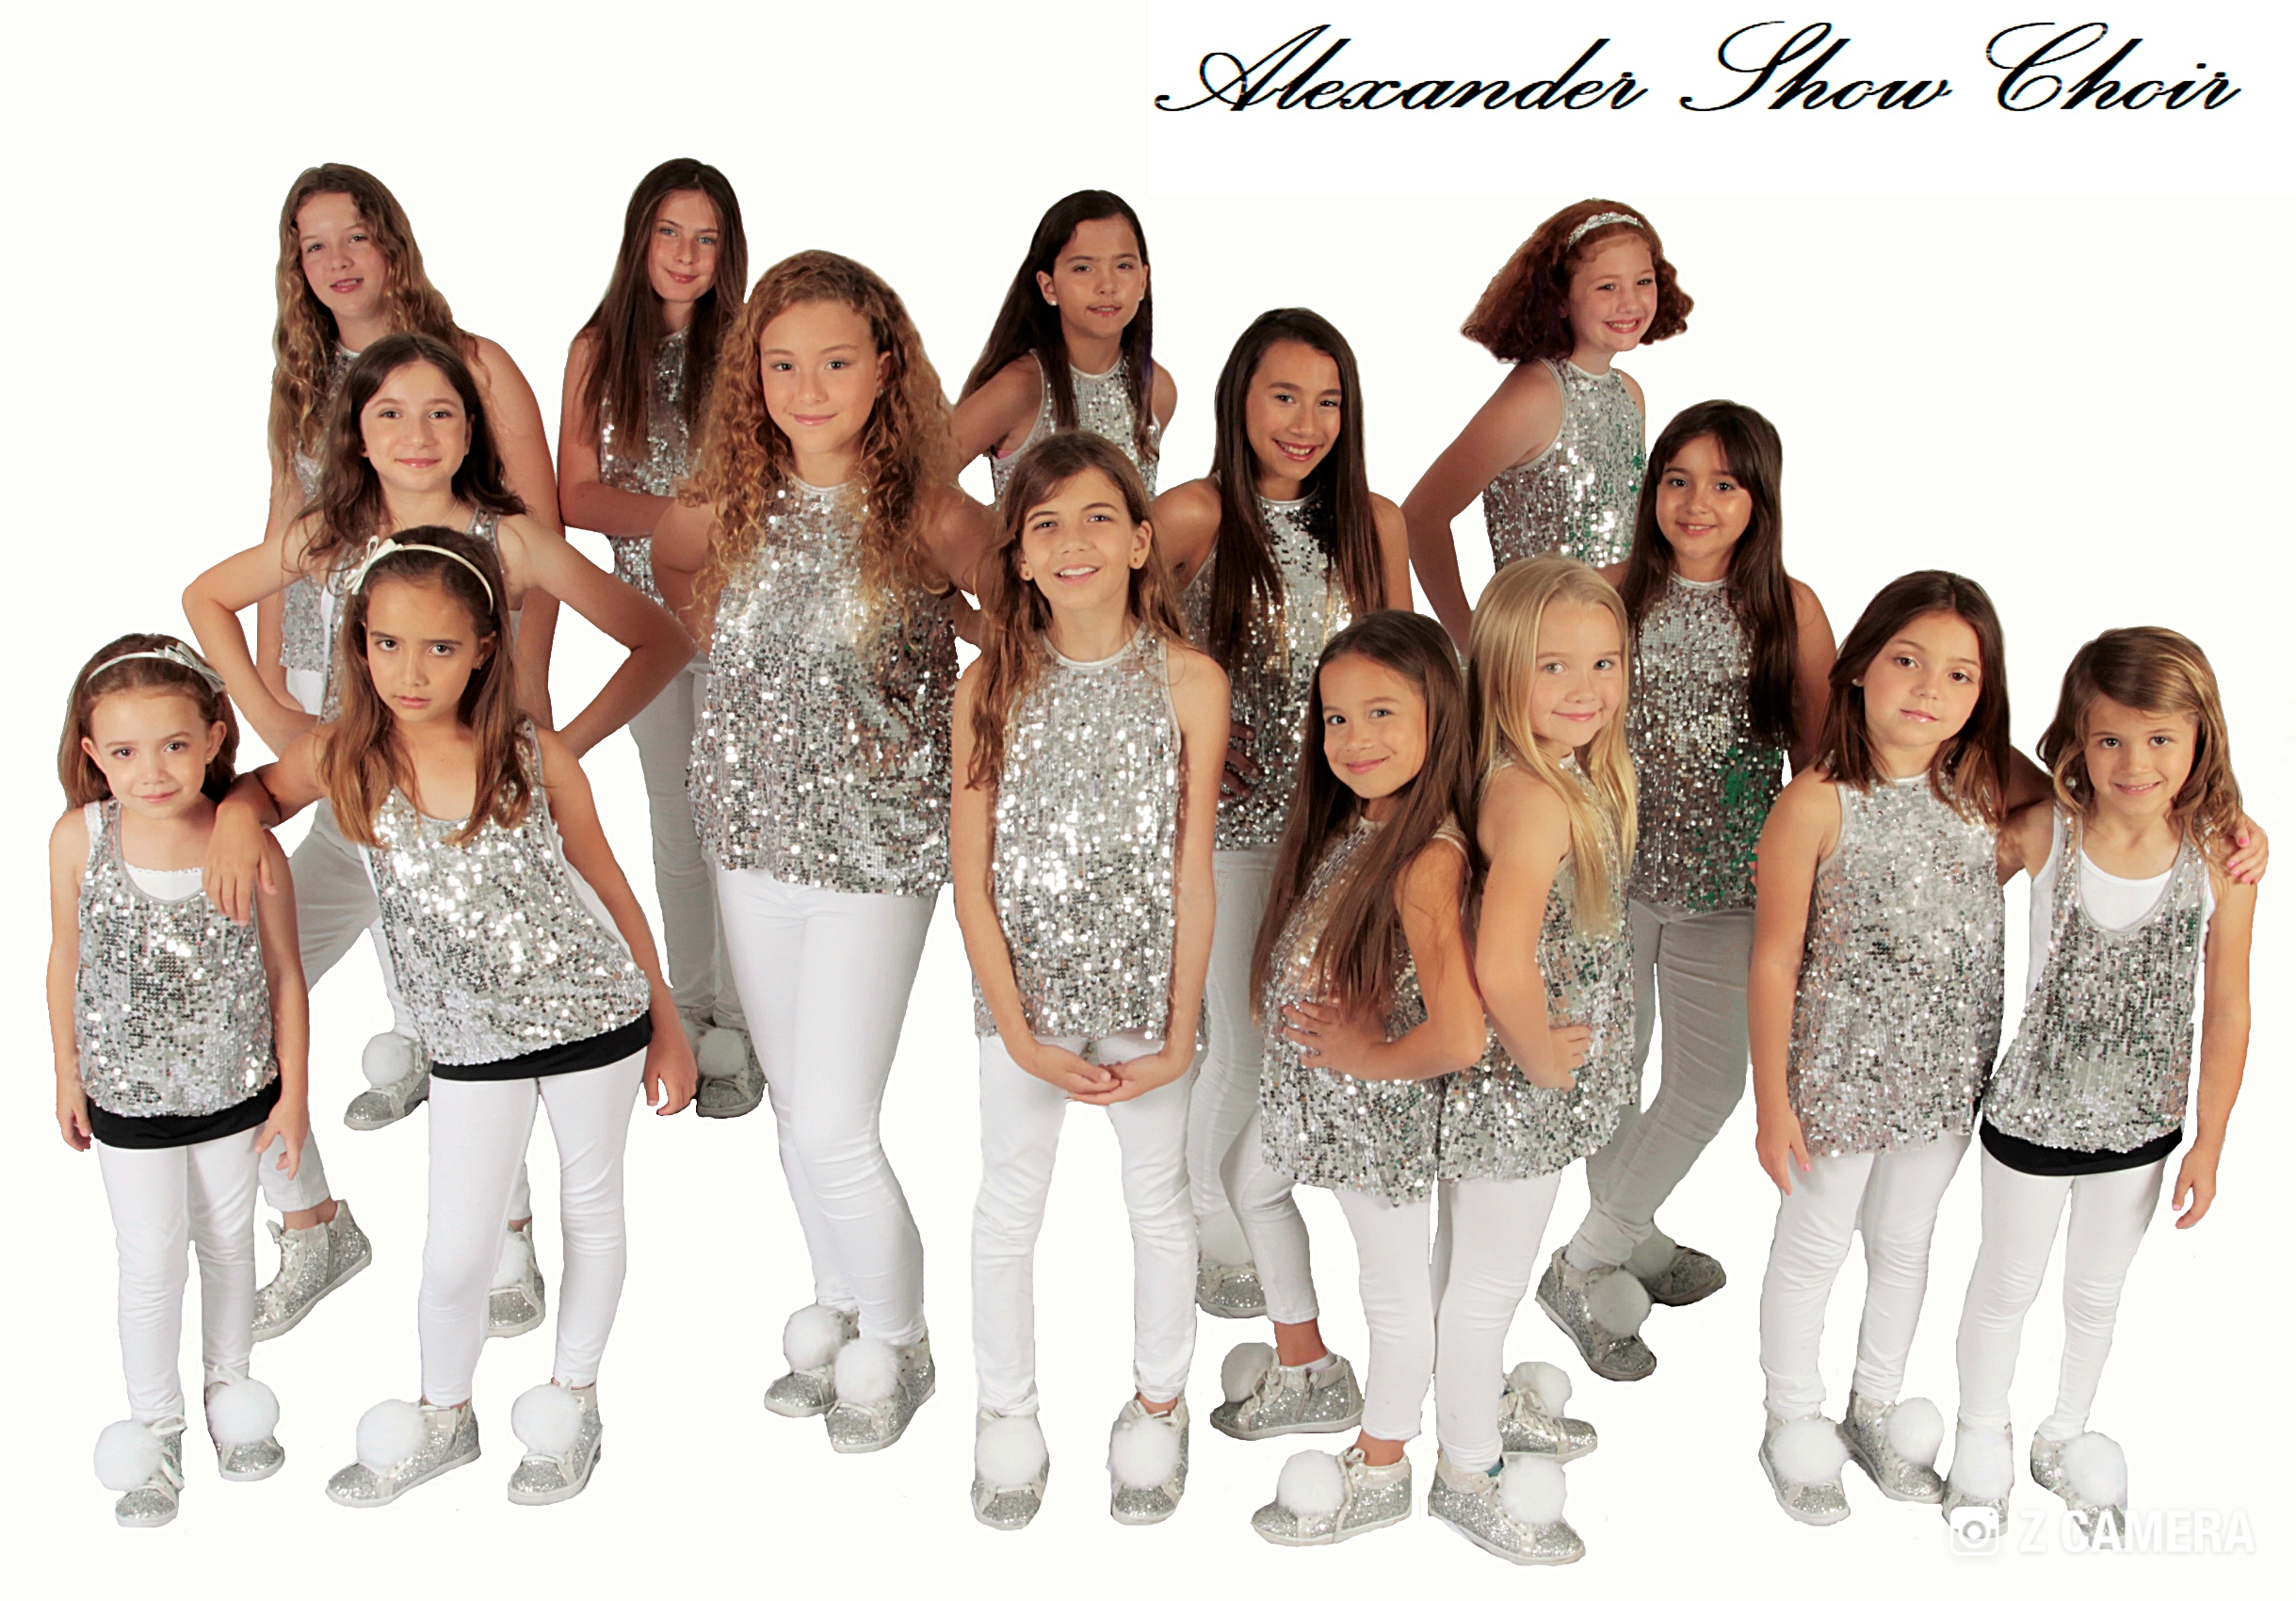 The Alexander Show Choir will be performing at Southland Mall Miami in November.